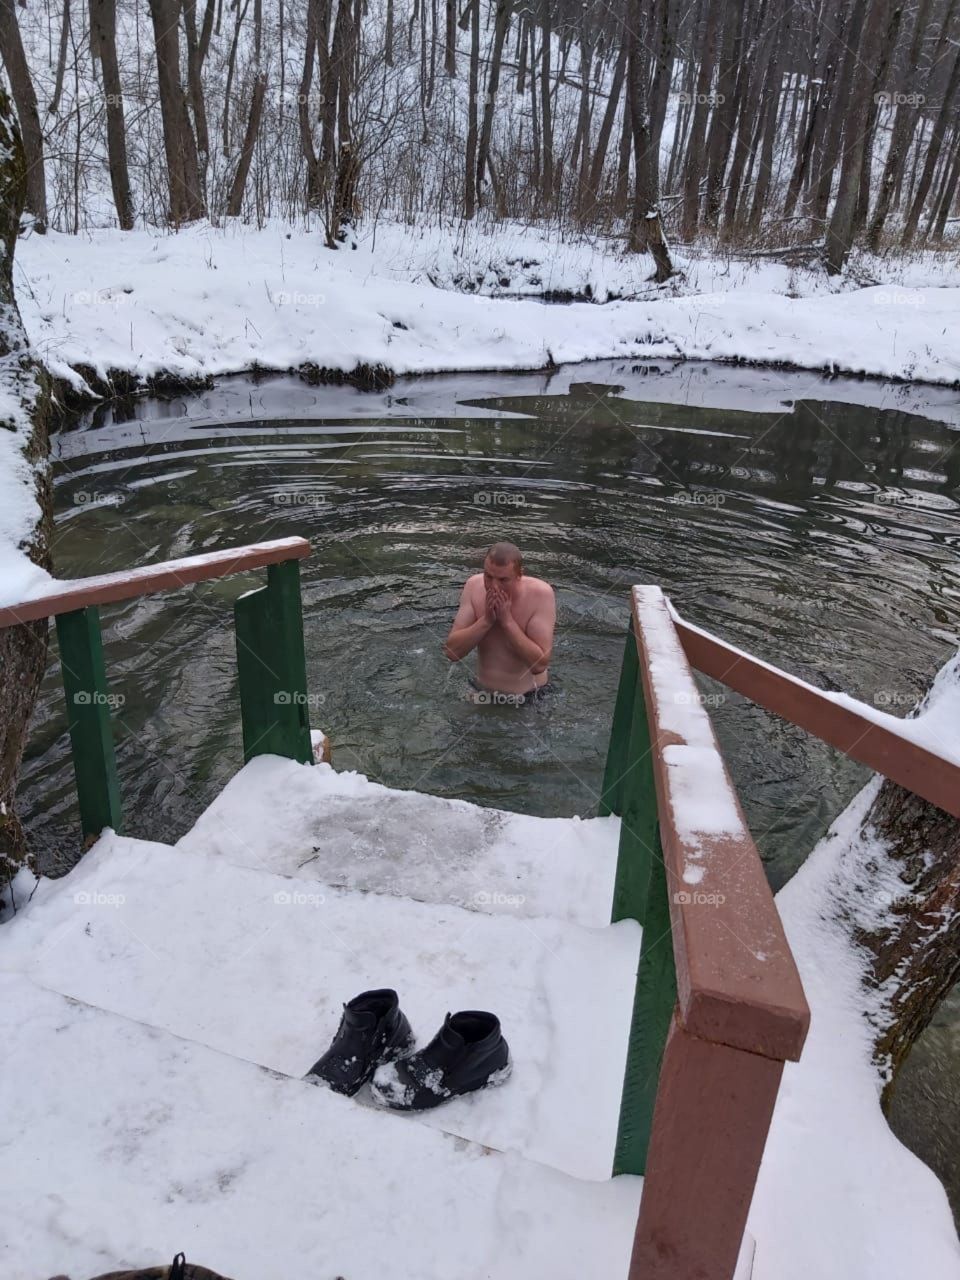 A man bathes in a lake in winter against the backdrop of forest and snow in the cold